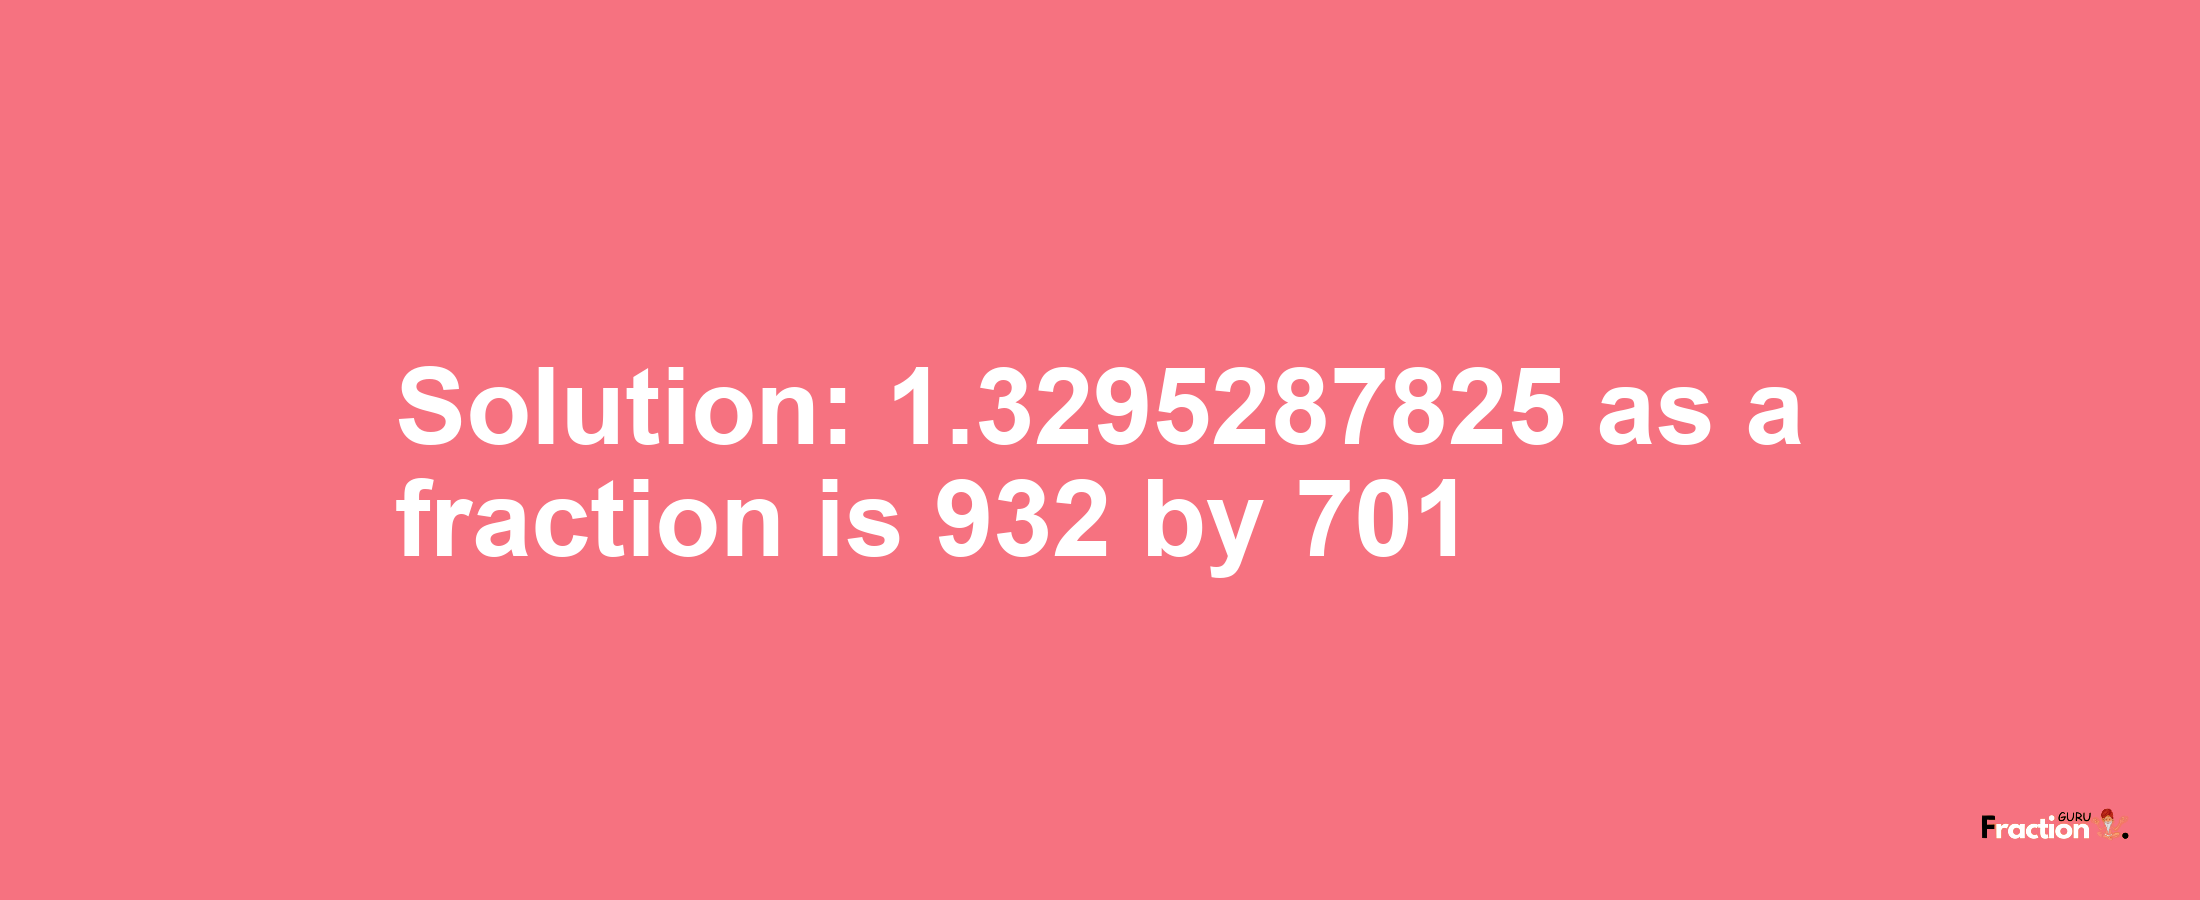 Solution:1.3295287825 as a fraction is 932/701